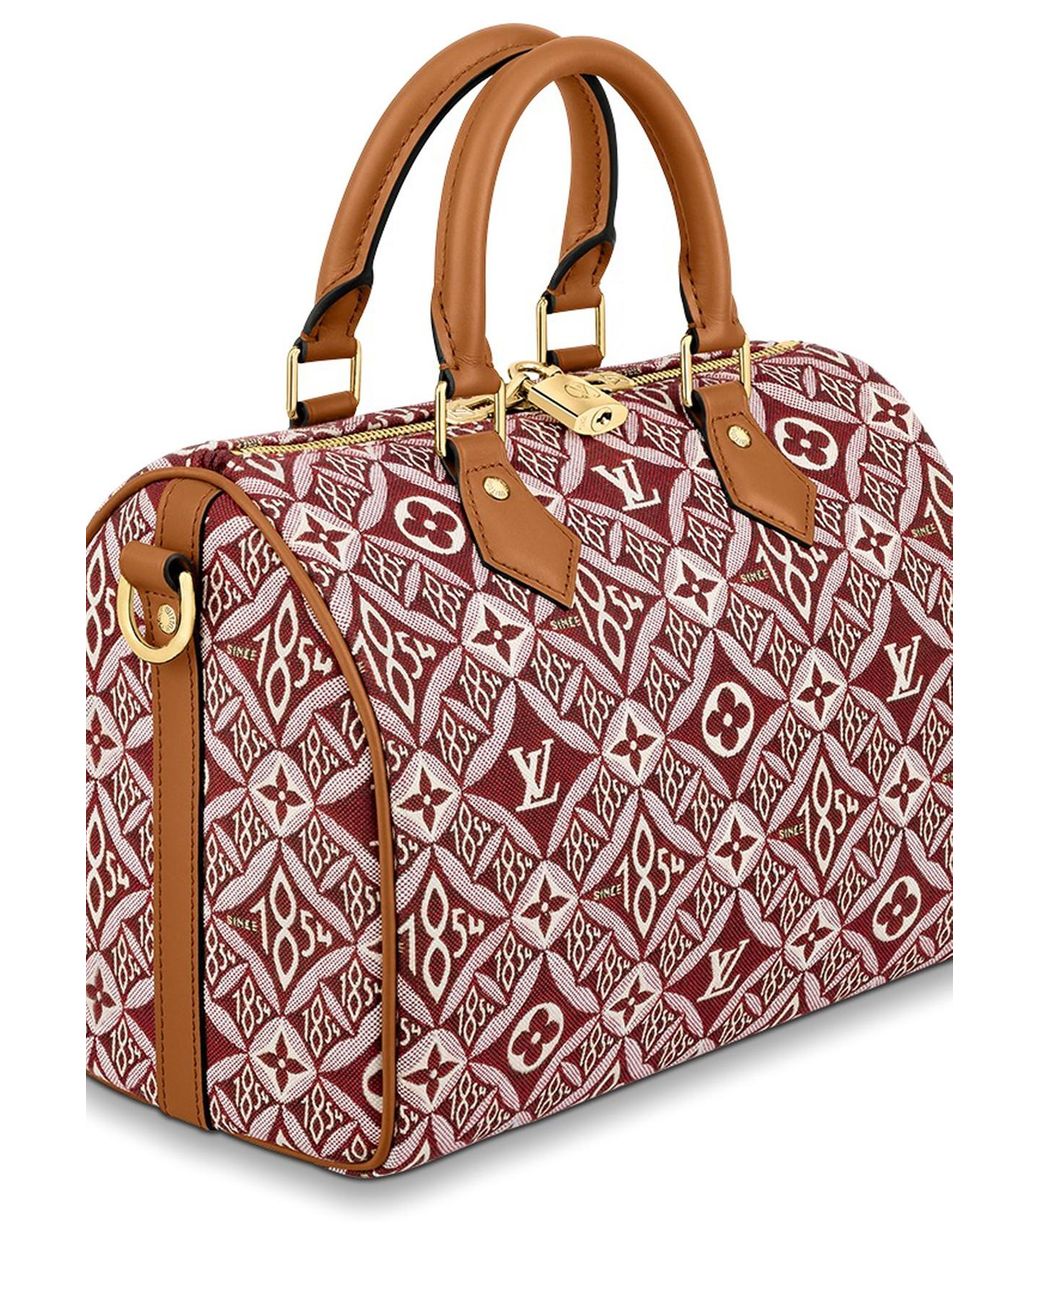 Coming Soon: Large Scale Louis Vuitton Bag BONSELL